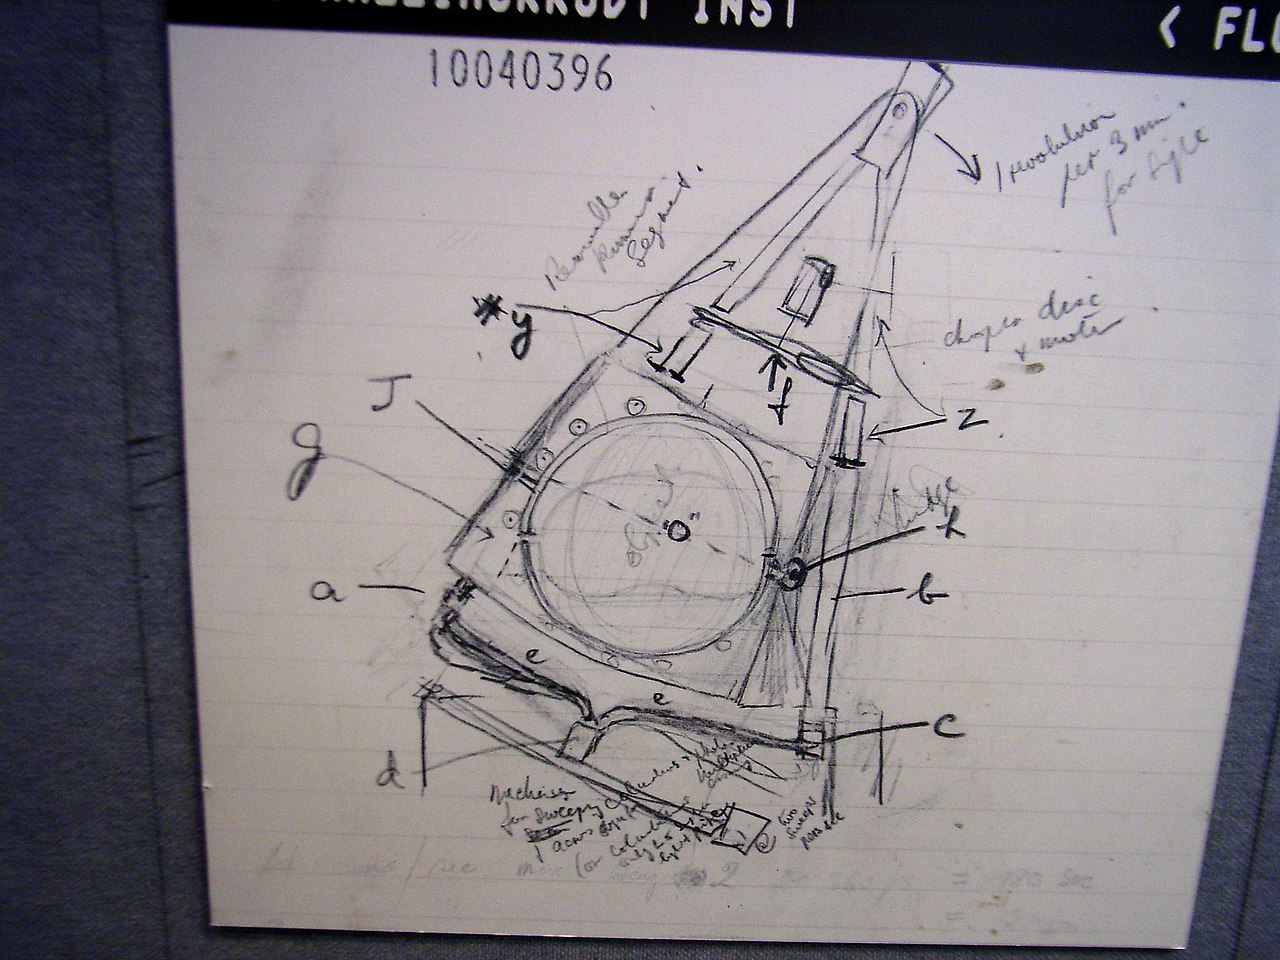 Hounsfield's sketch of the prototype CT scanner